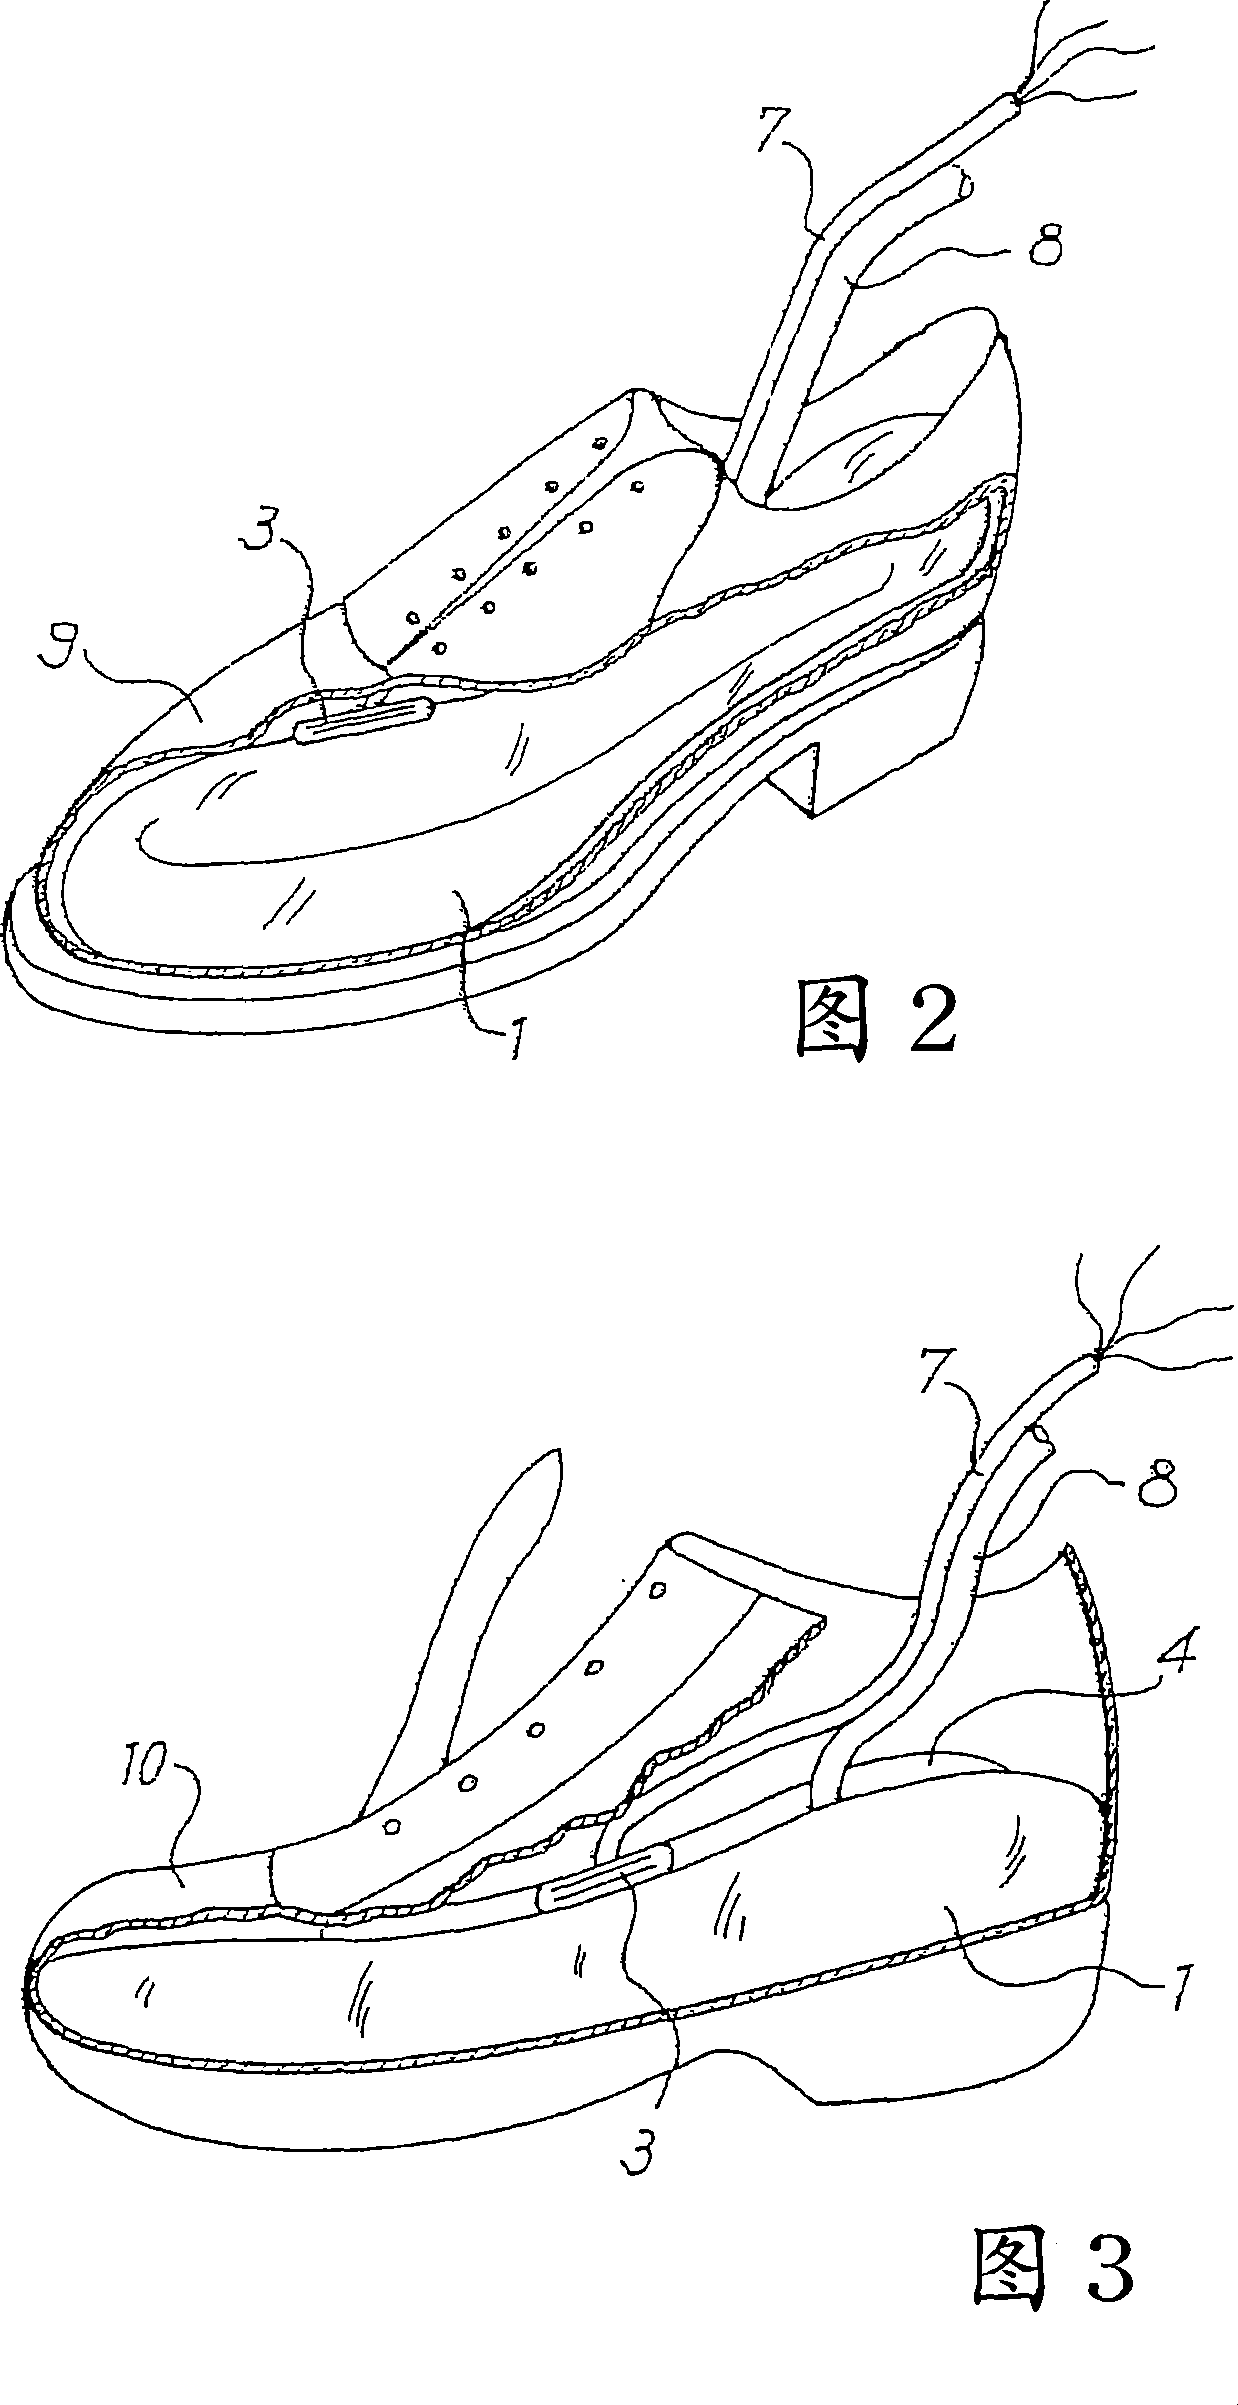 A method and device for inspecting the interior of a footwear